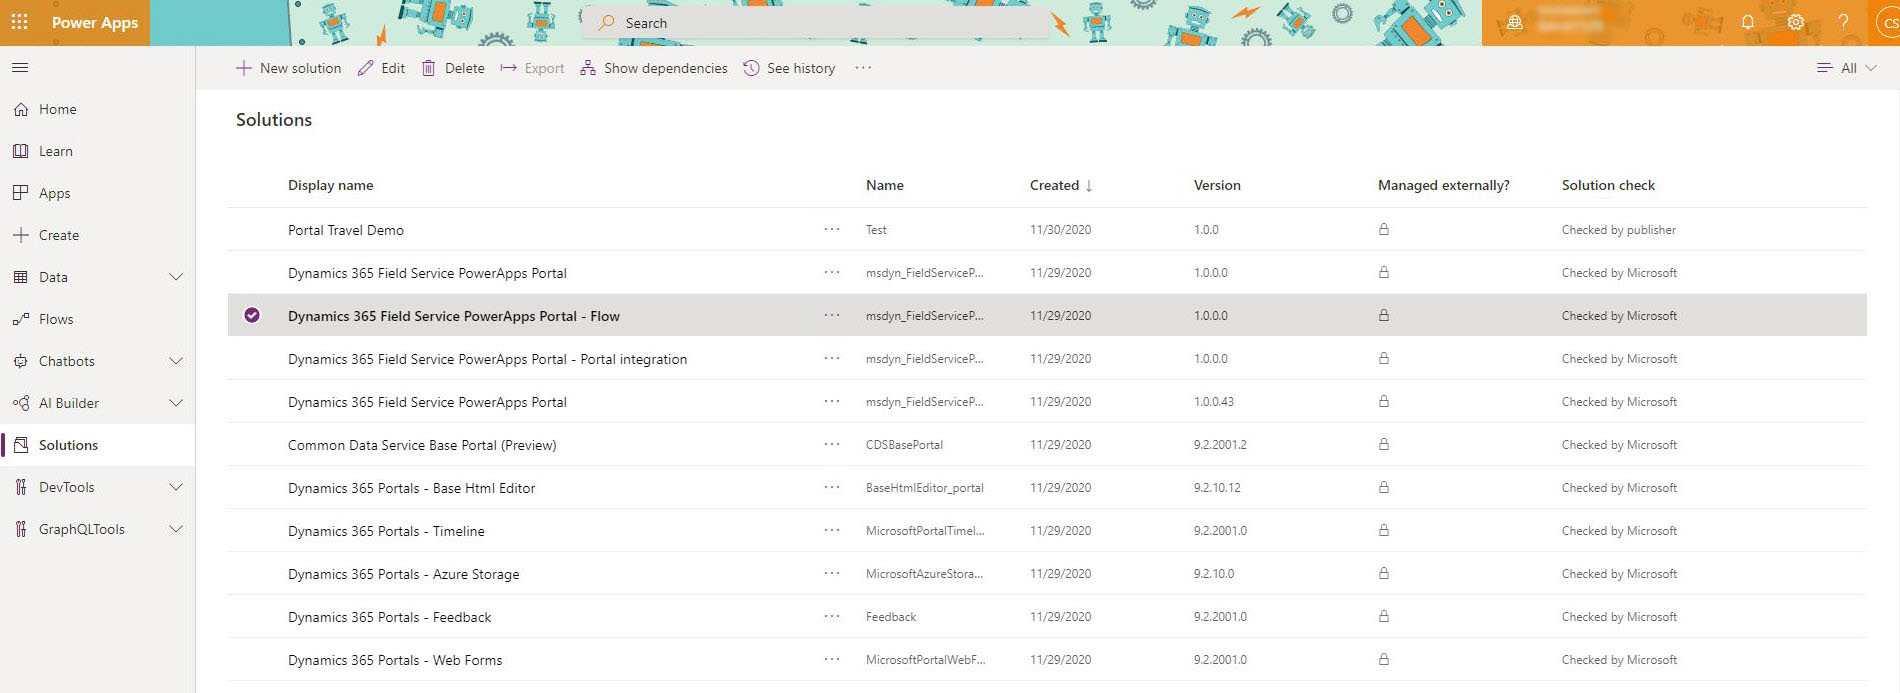 List of Power Apps solutions with "Dynamics 365 Field Service PowerApps Portal – Flow" selected.